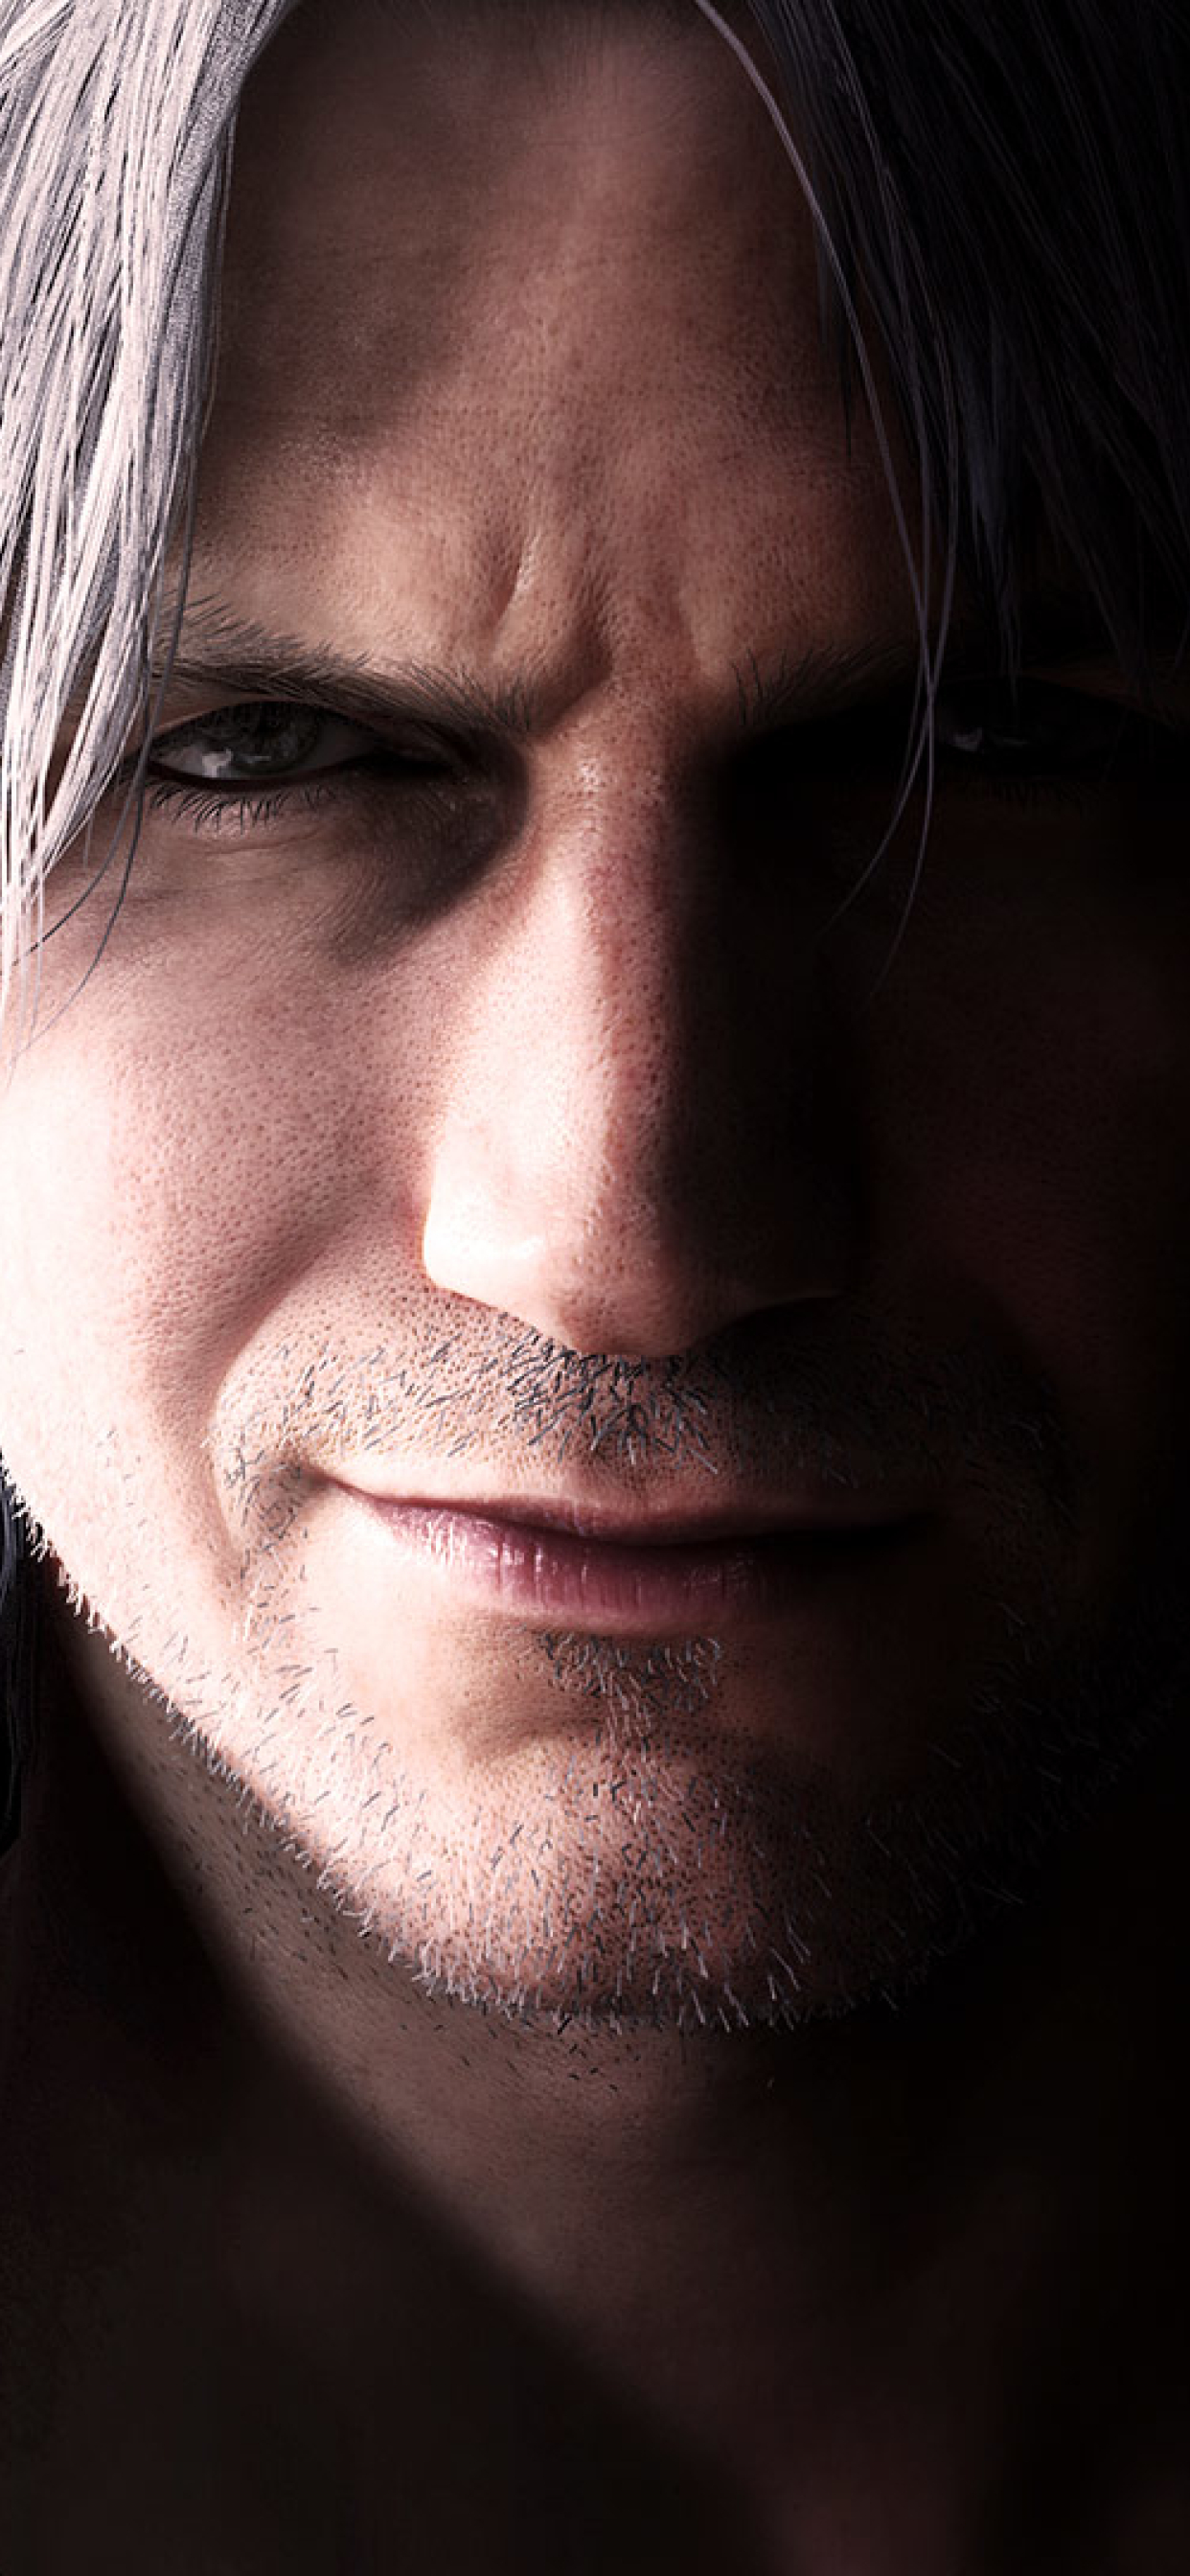 1242x26 Dante Devil May Cry 5 Iphone Xs Max Wallpaper Hd Games 4k Wallpapers Images Photos And Background Wallpapers Den